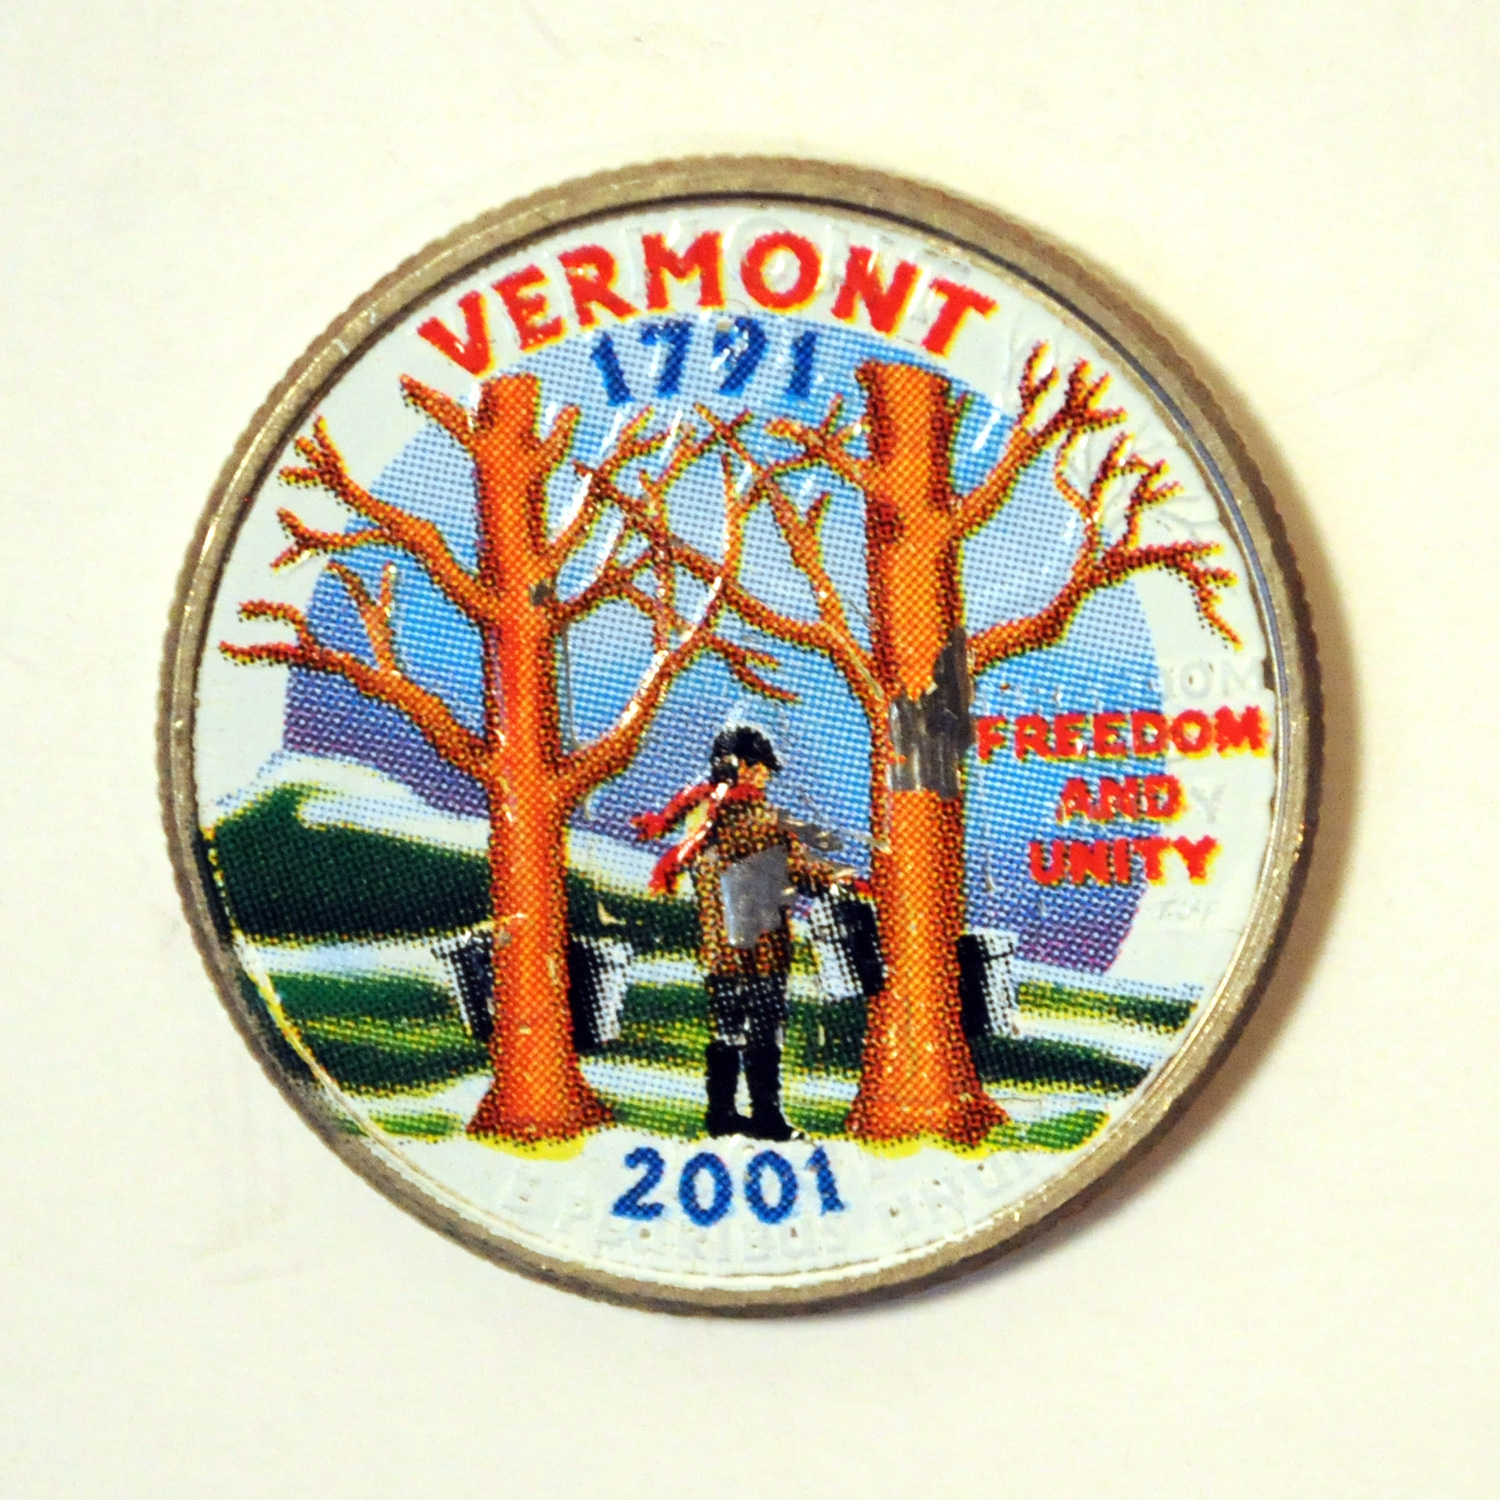 2001-p-vermont-color-state-quarter-scoopy-s-collection